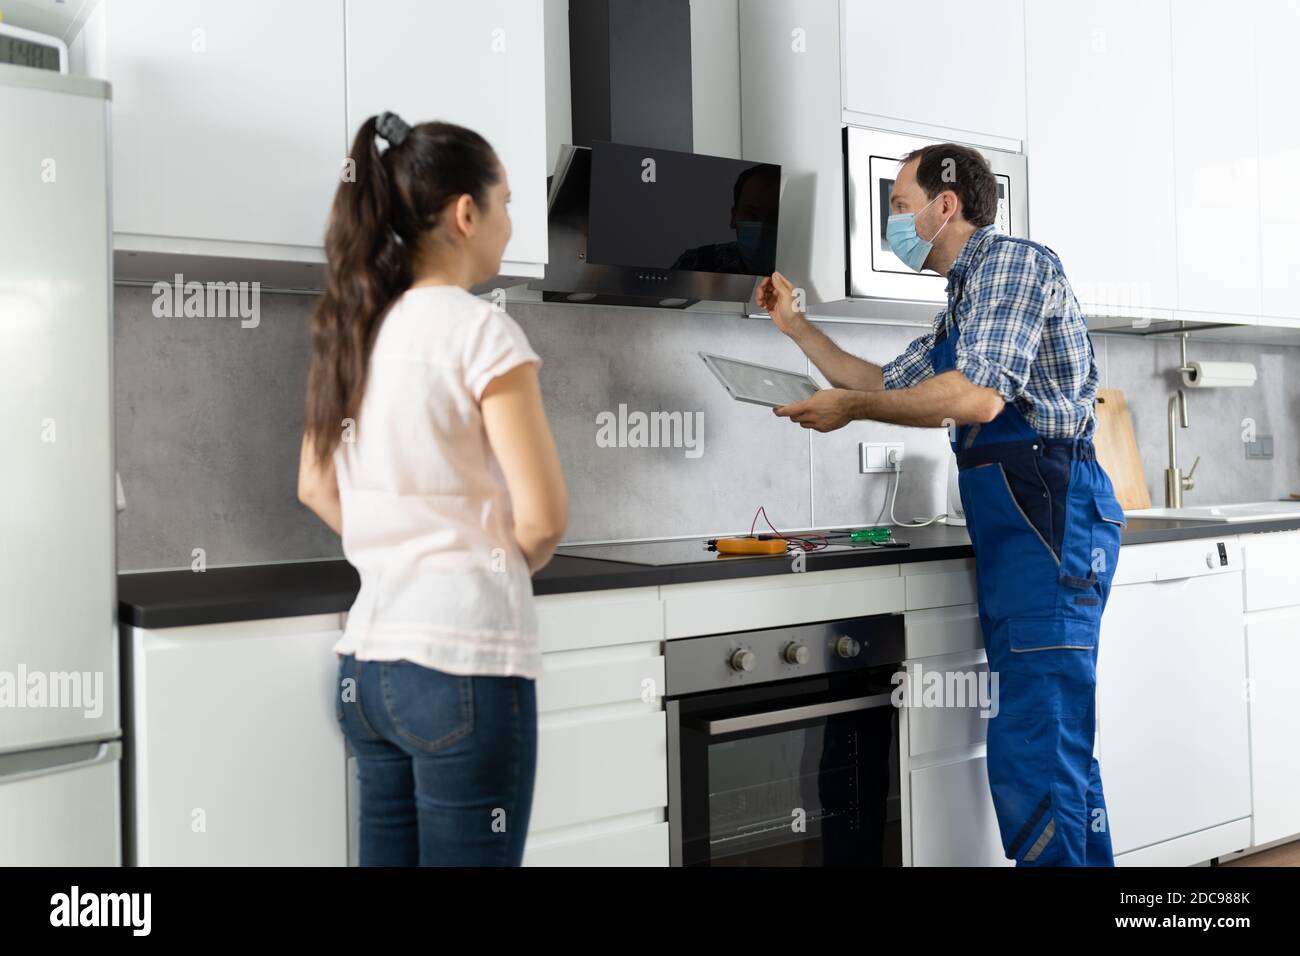 Home Extractor Appliances Installation And Repair In Face Mask Stock Photo